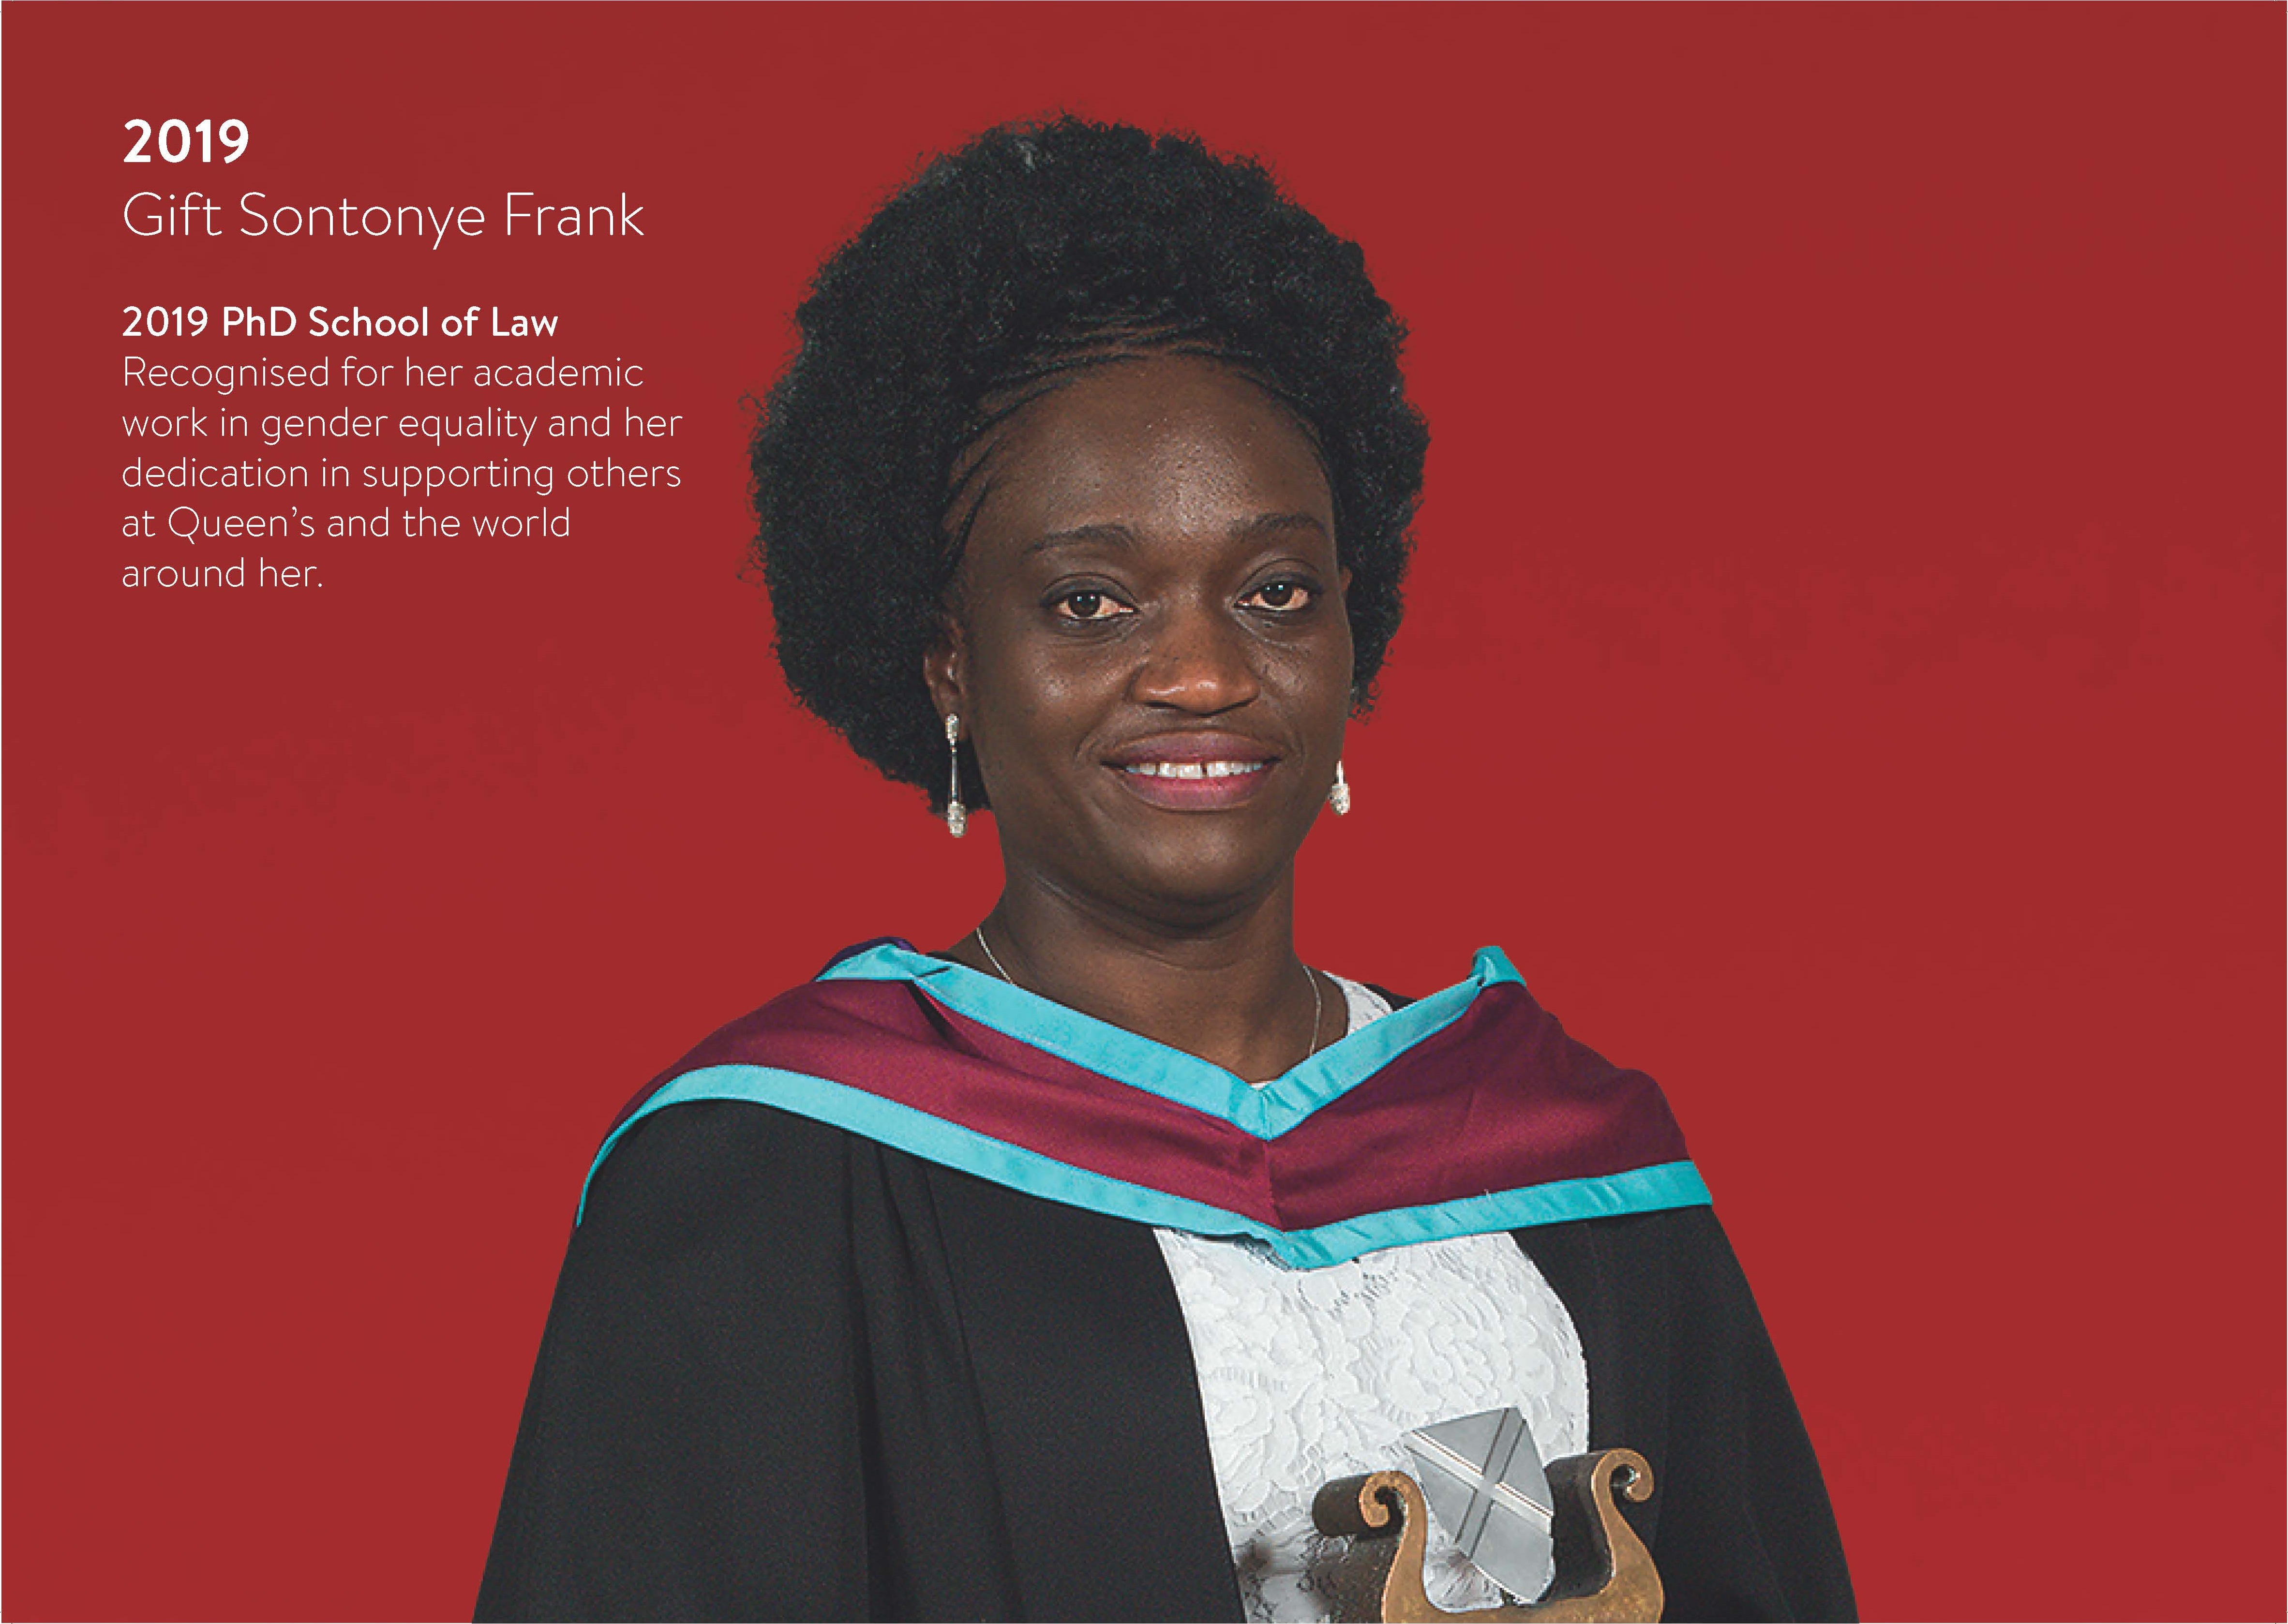 Photo of Gift Sontoye Frank in graduation gown with short biog